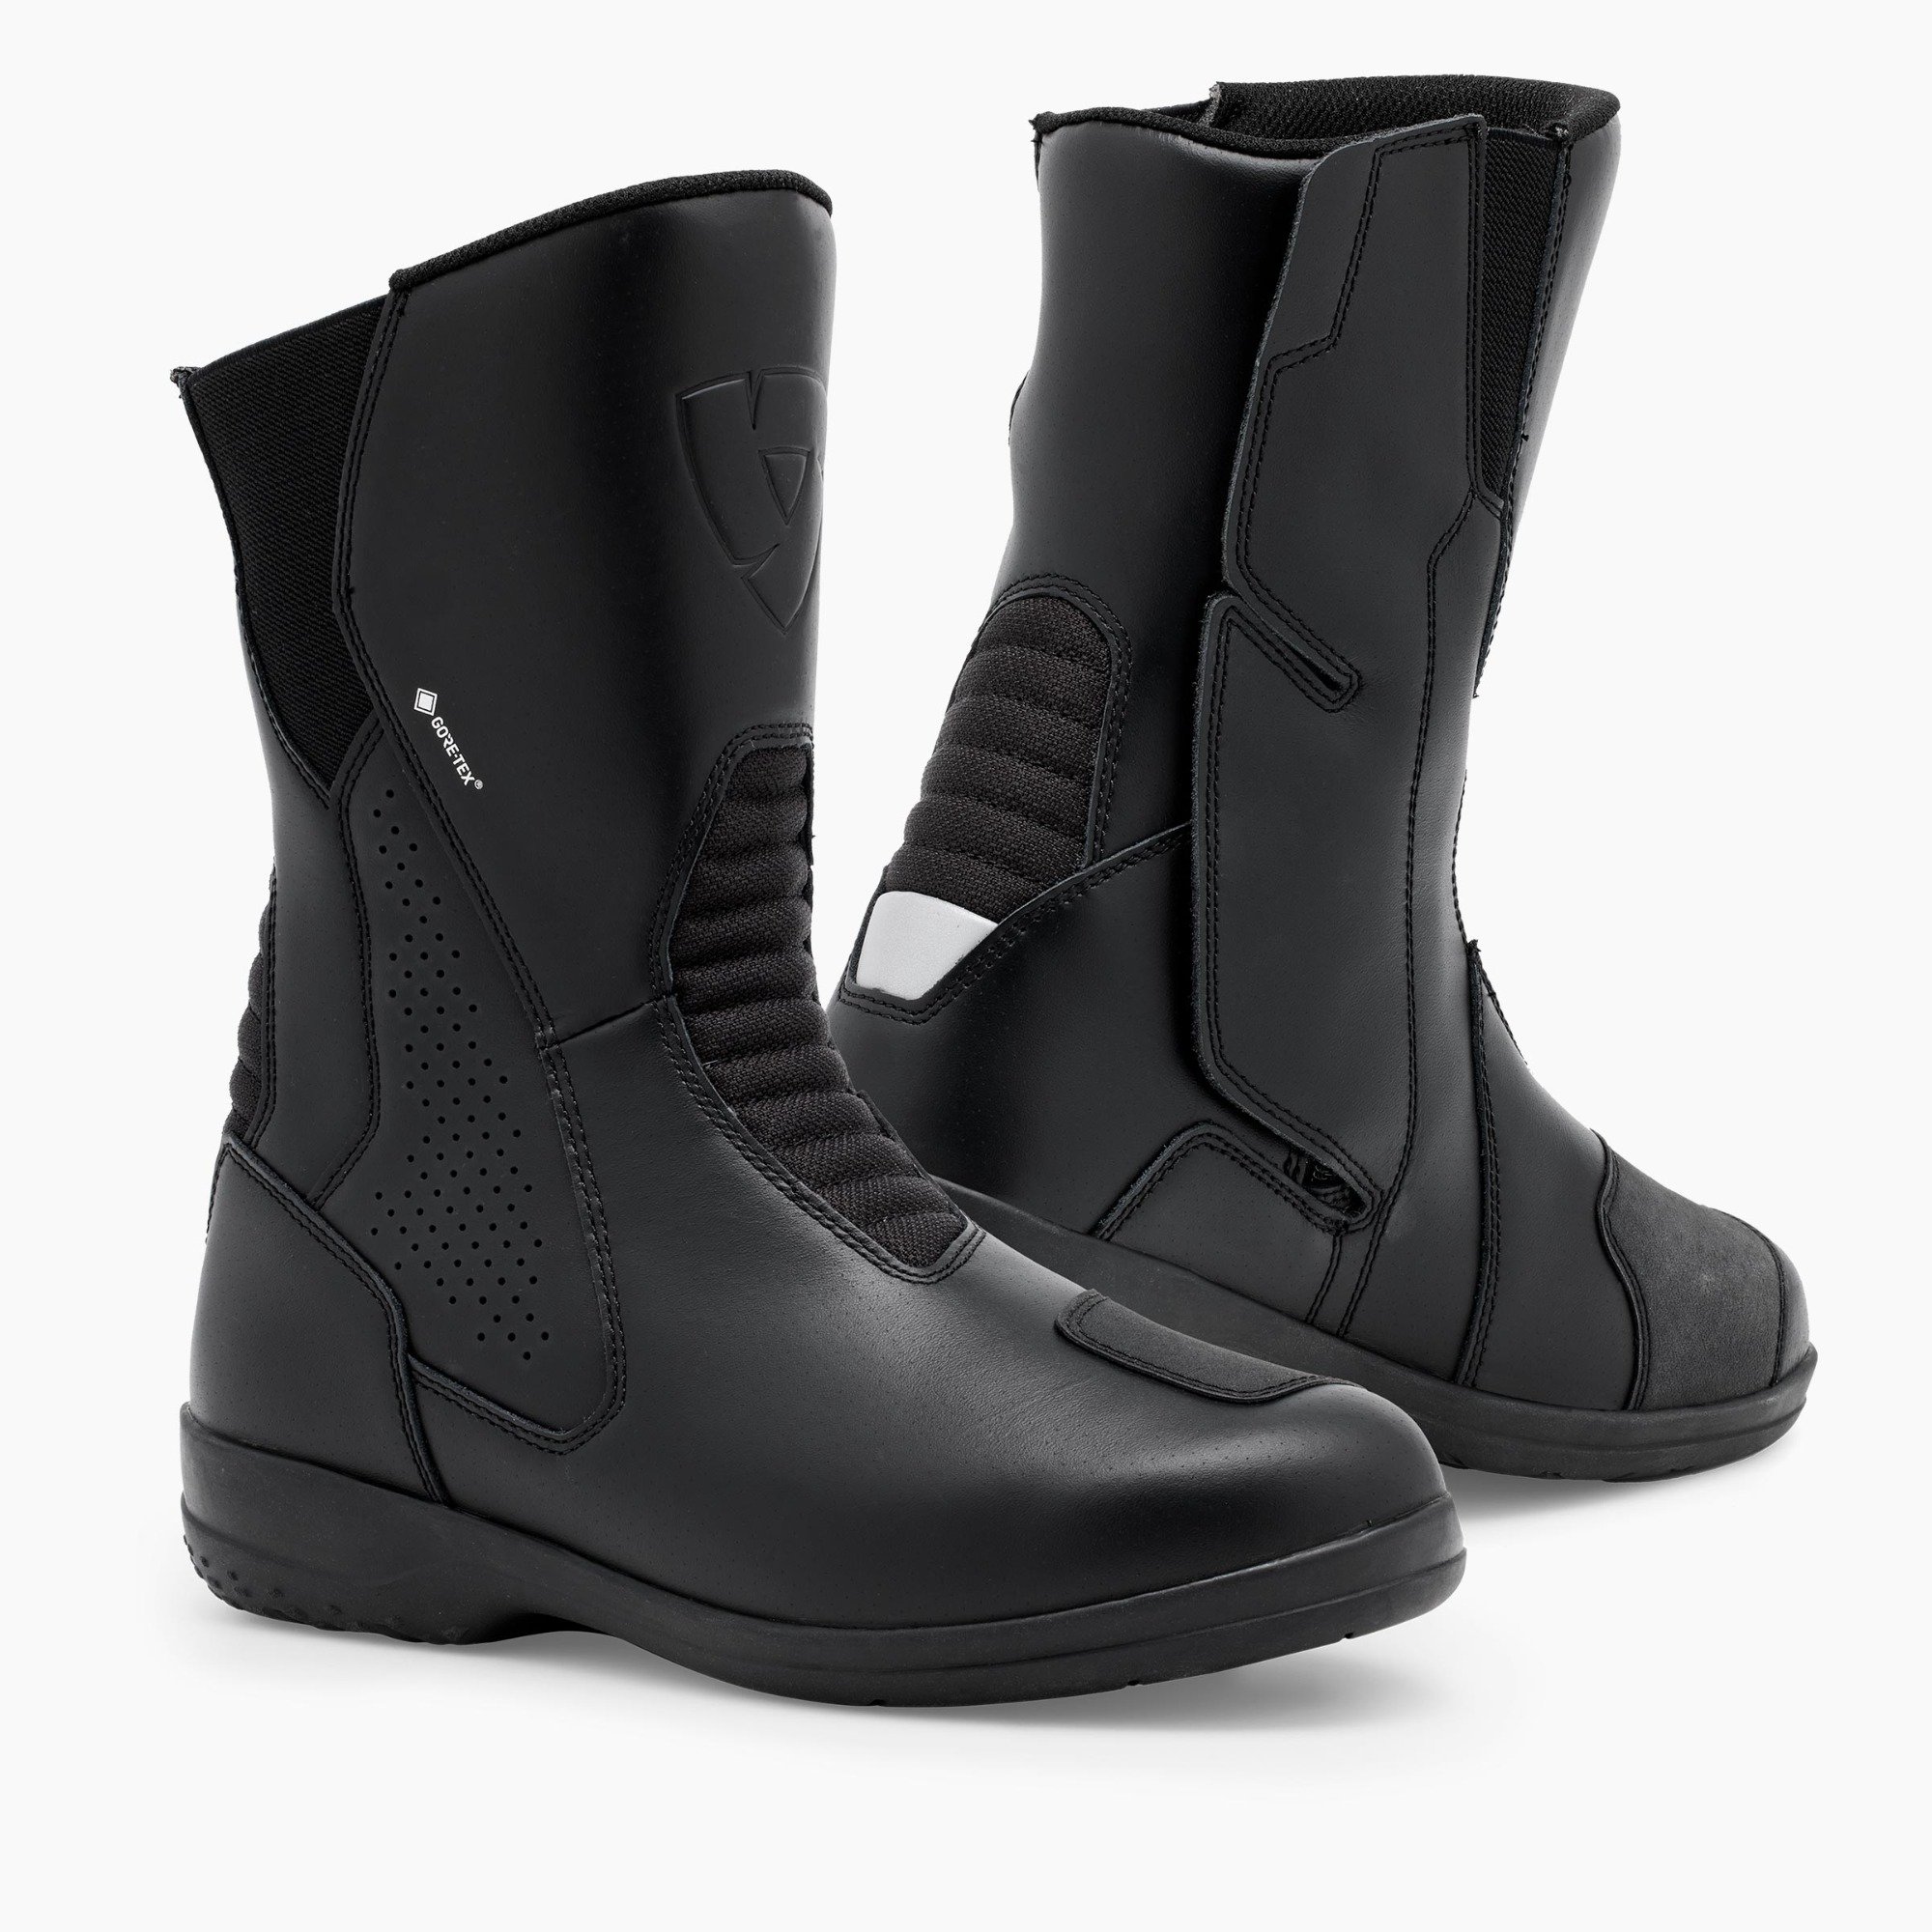 Image of REV'IT! Arena GTX Boots Lady Black Size 42 ID 8700001357029